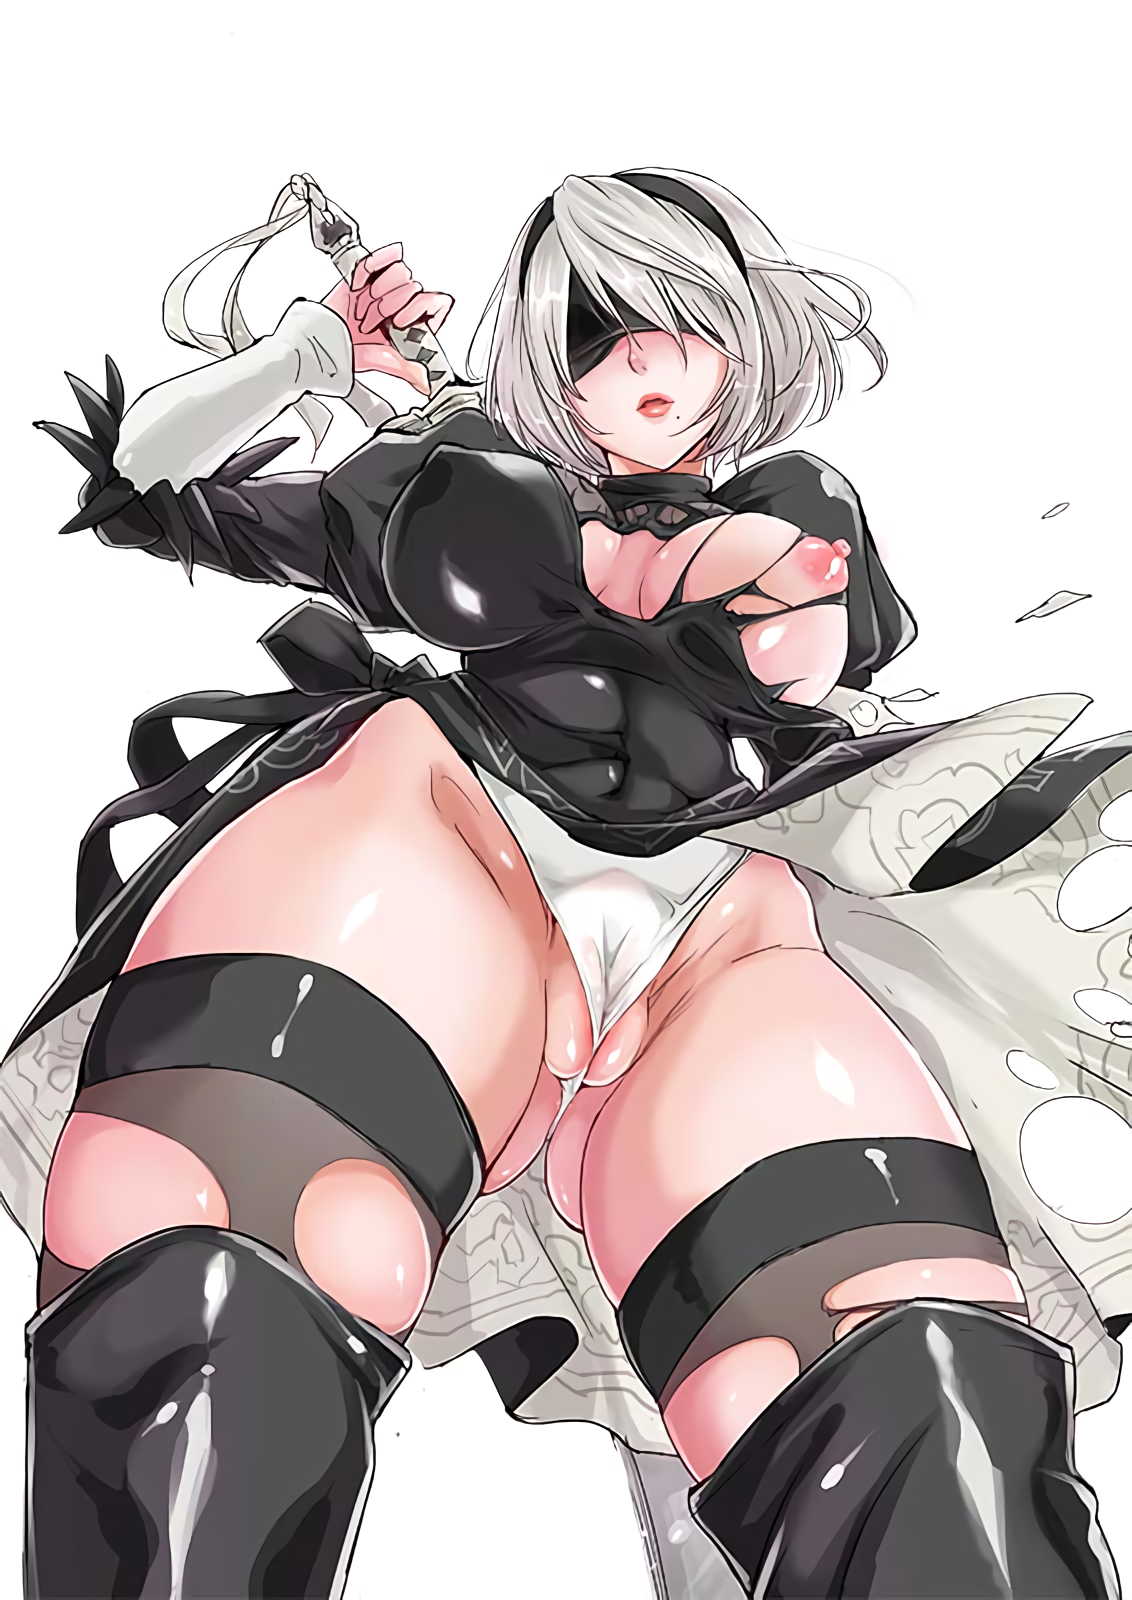 2B standing over you